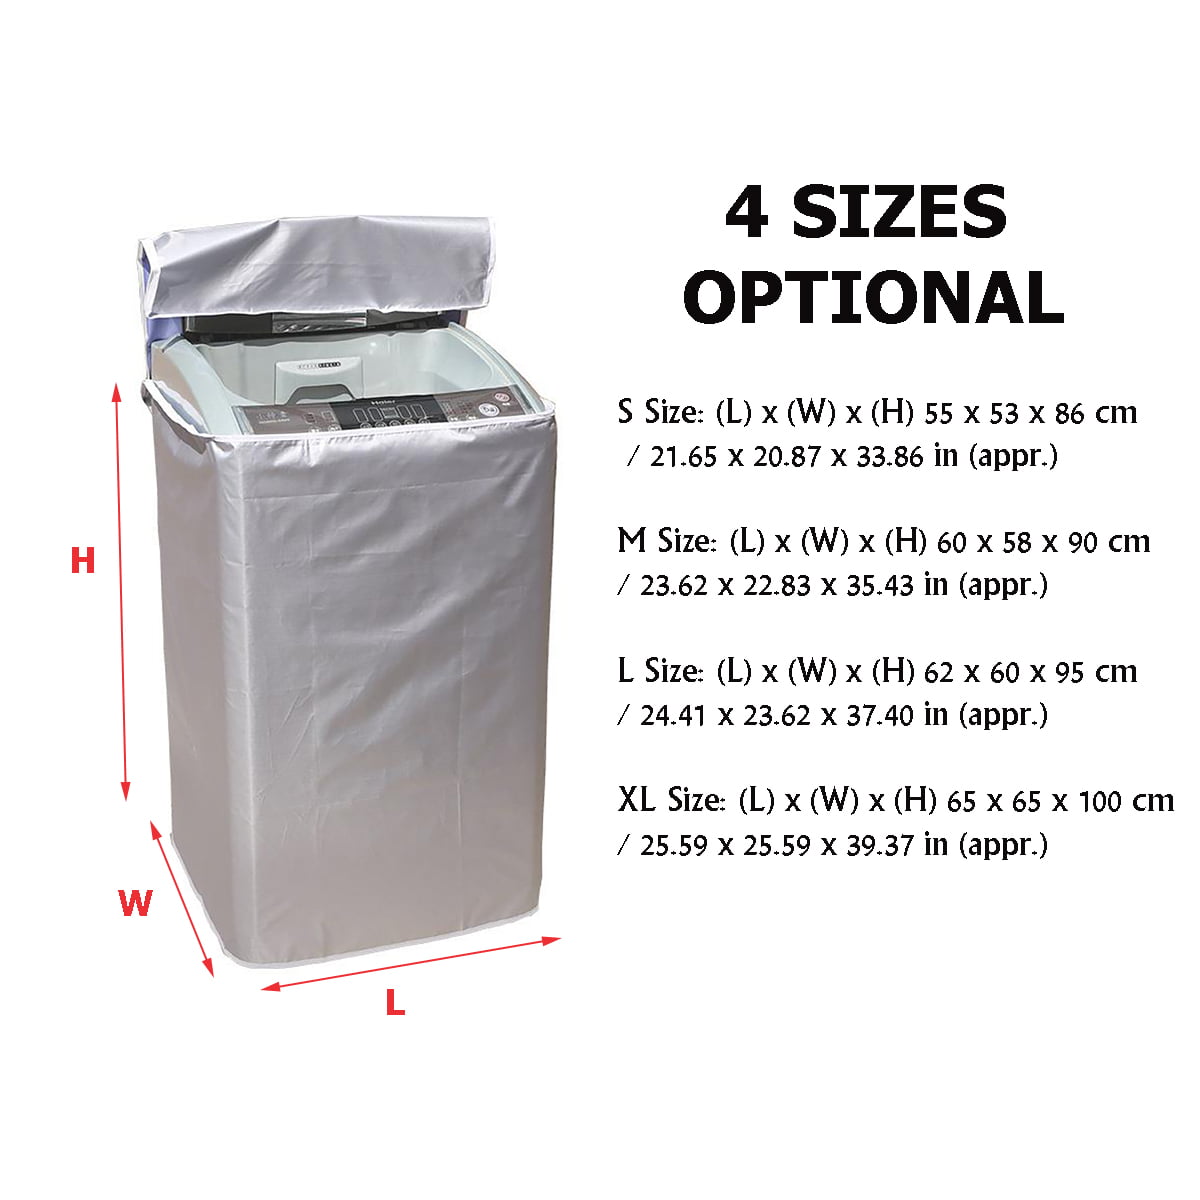 Svetya Portable Washing Machine Cover,Top Load Washer Dryer Cover,Waterproof for Fully-Automatic/Wheel Washing Machine Color : Silver 